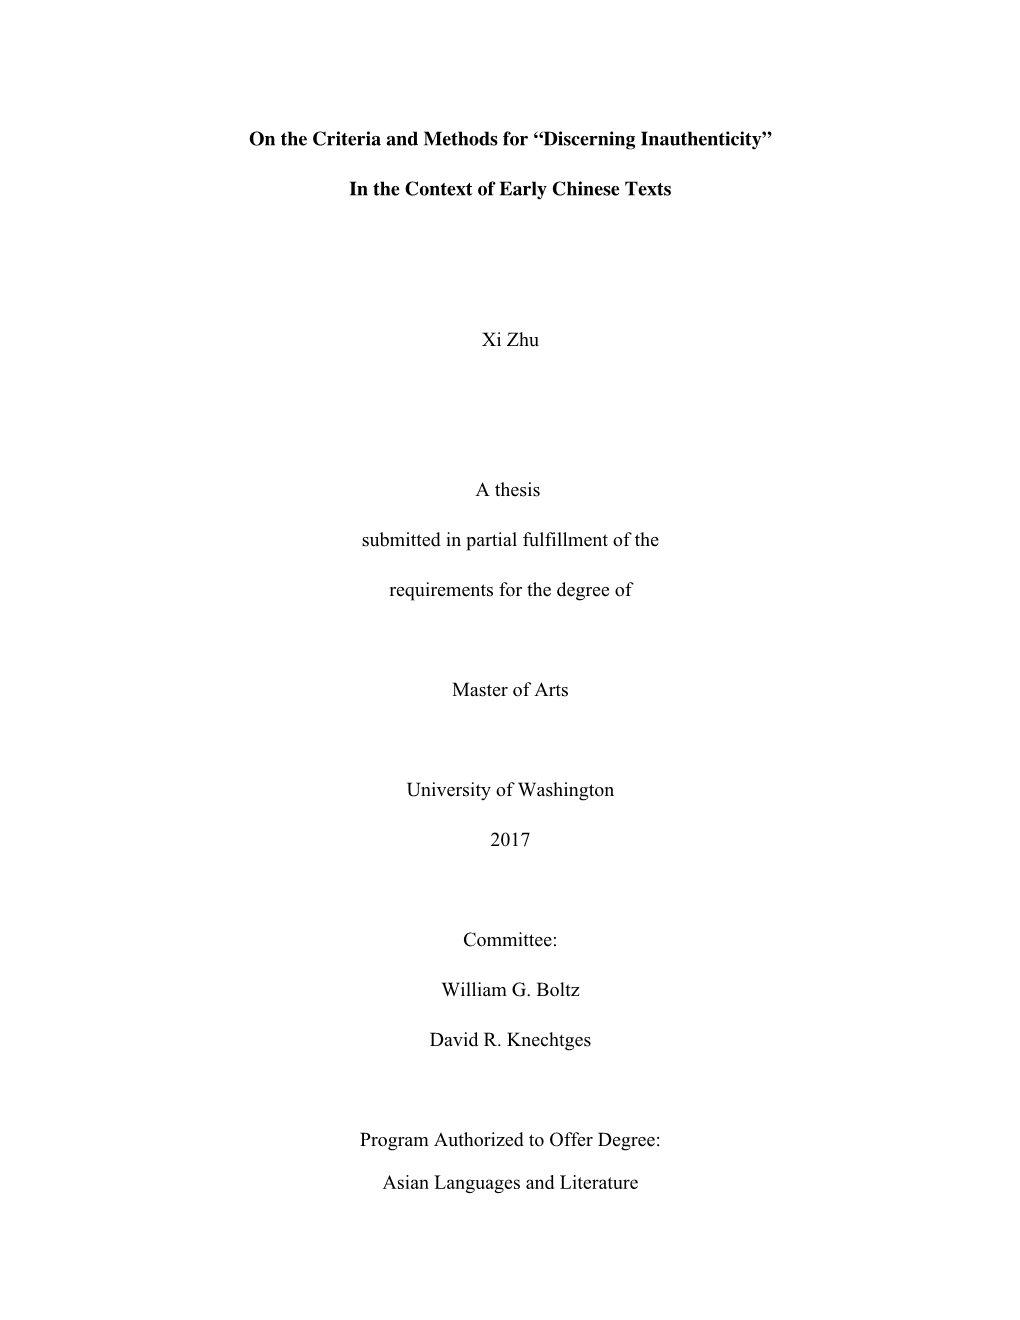 In the Context of Early Chinese Texts Xi Zhu a Thesis Submitte